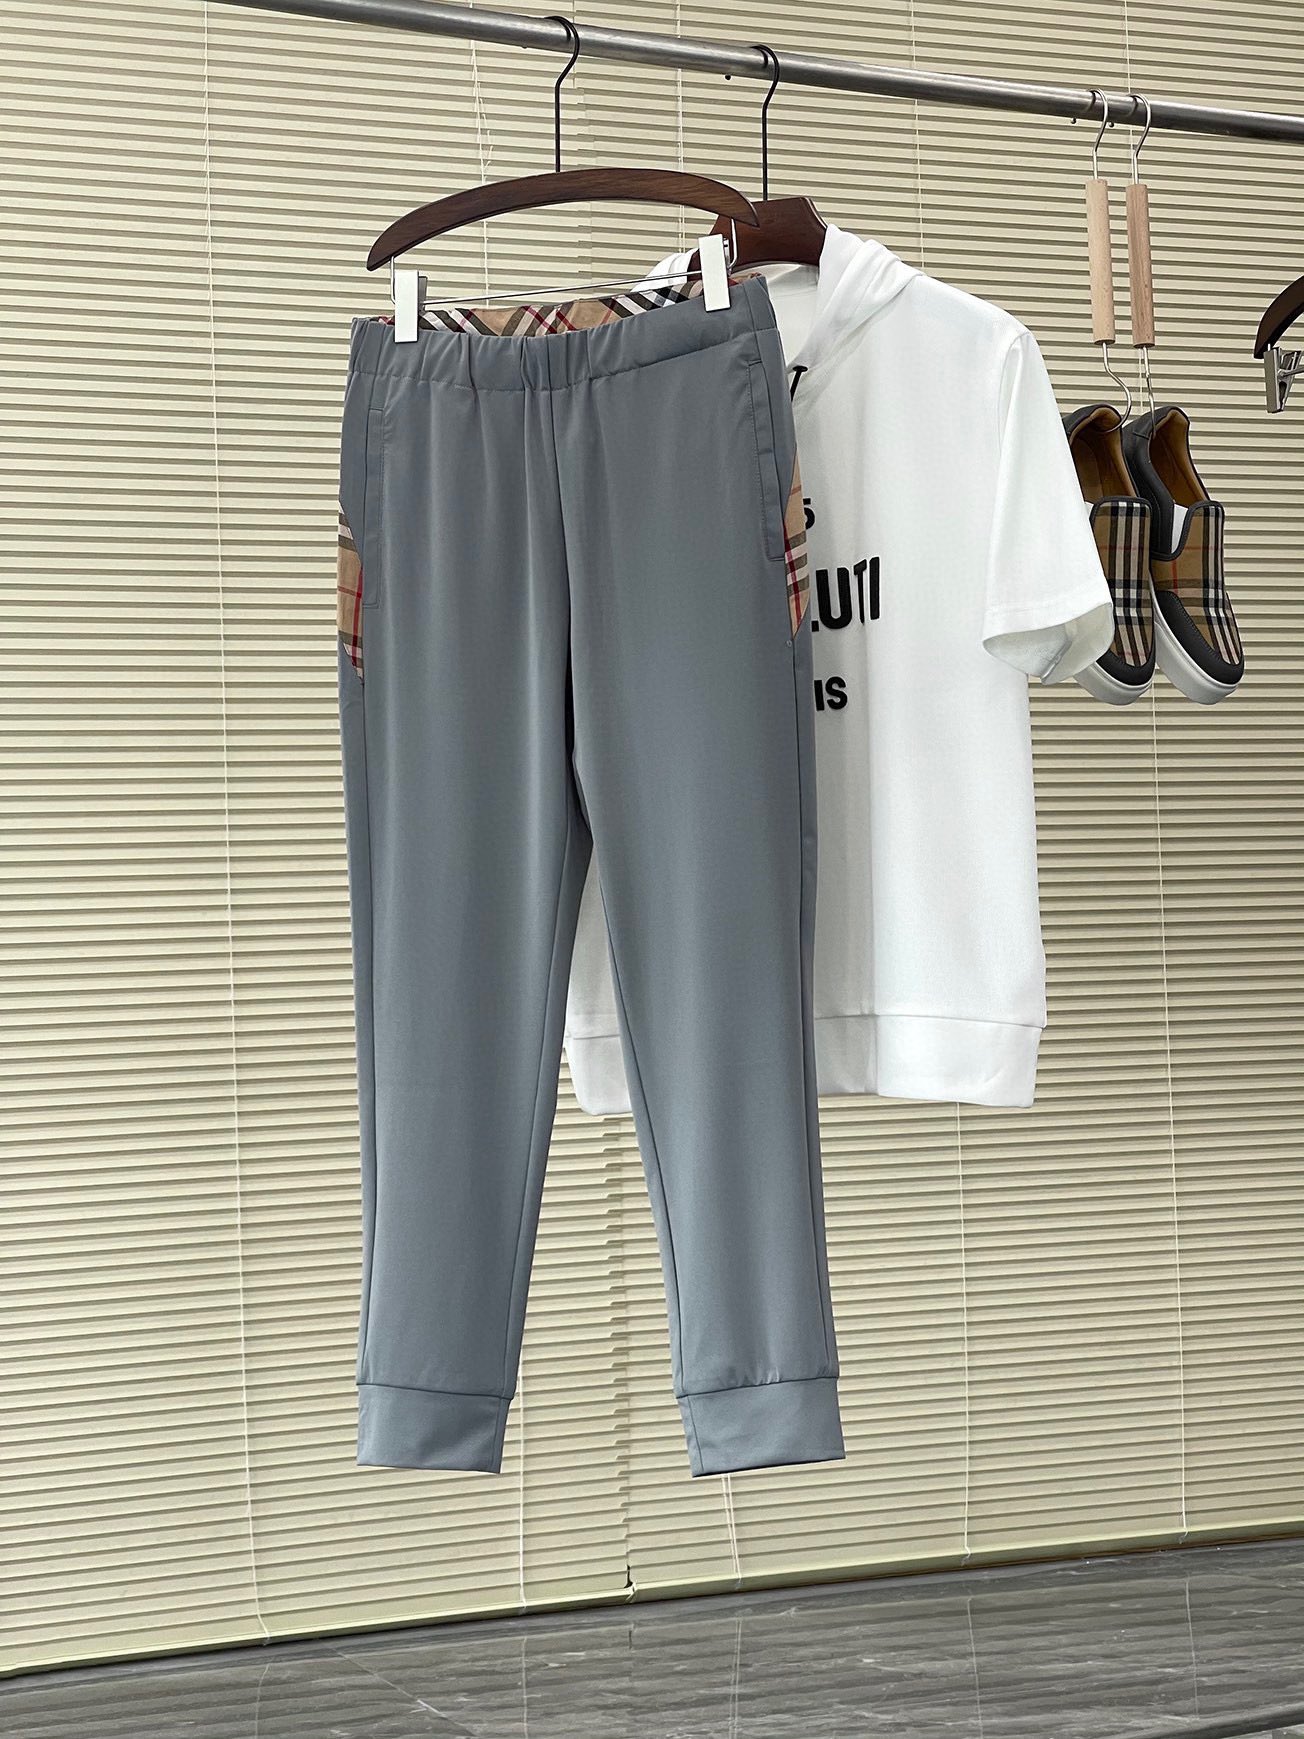 Clothing Pants & Trousers Black Grey Khaki Splicing Men Polyester Spandex Spring/Summer Collection Fashion Casual